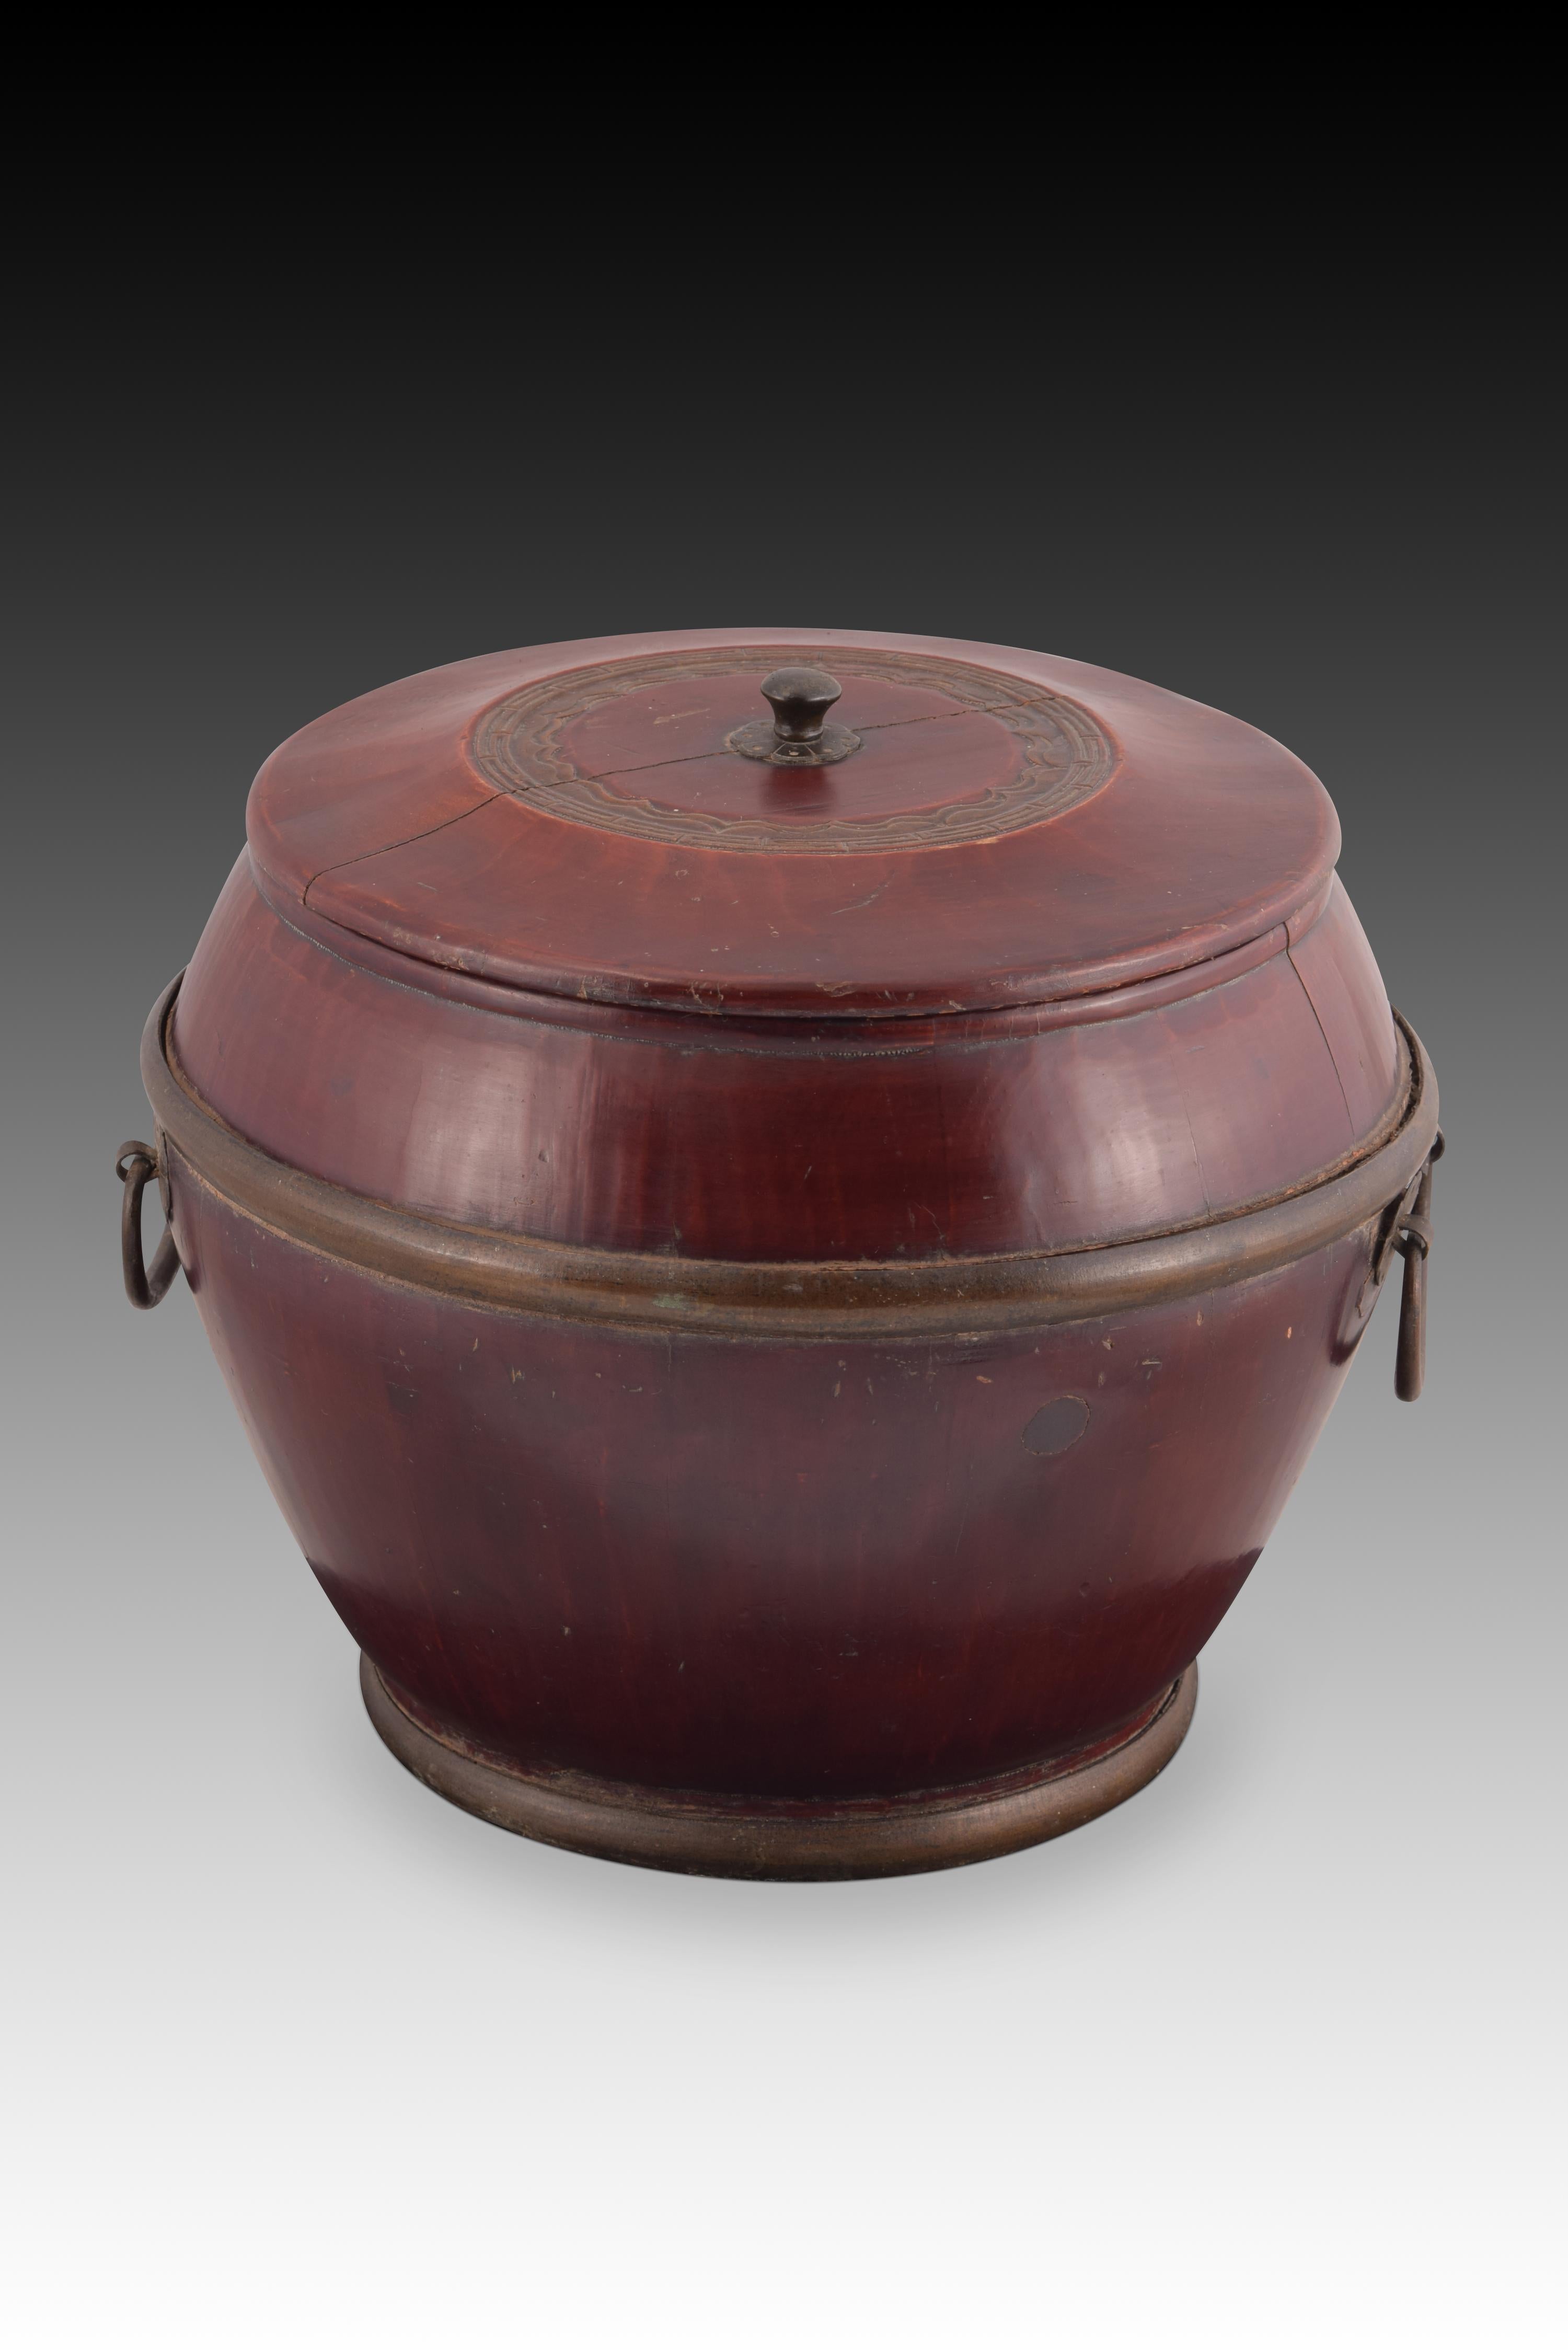 Oriental container for rice. Wood and metal. China, towards the beginning of the 20th century. 
Chinese container for storing rice, made of carved and varnished reddish wood, with a flattened ovoid body and a flat lid, slightly raised towards the